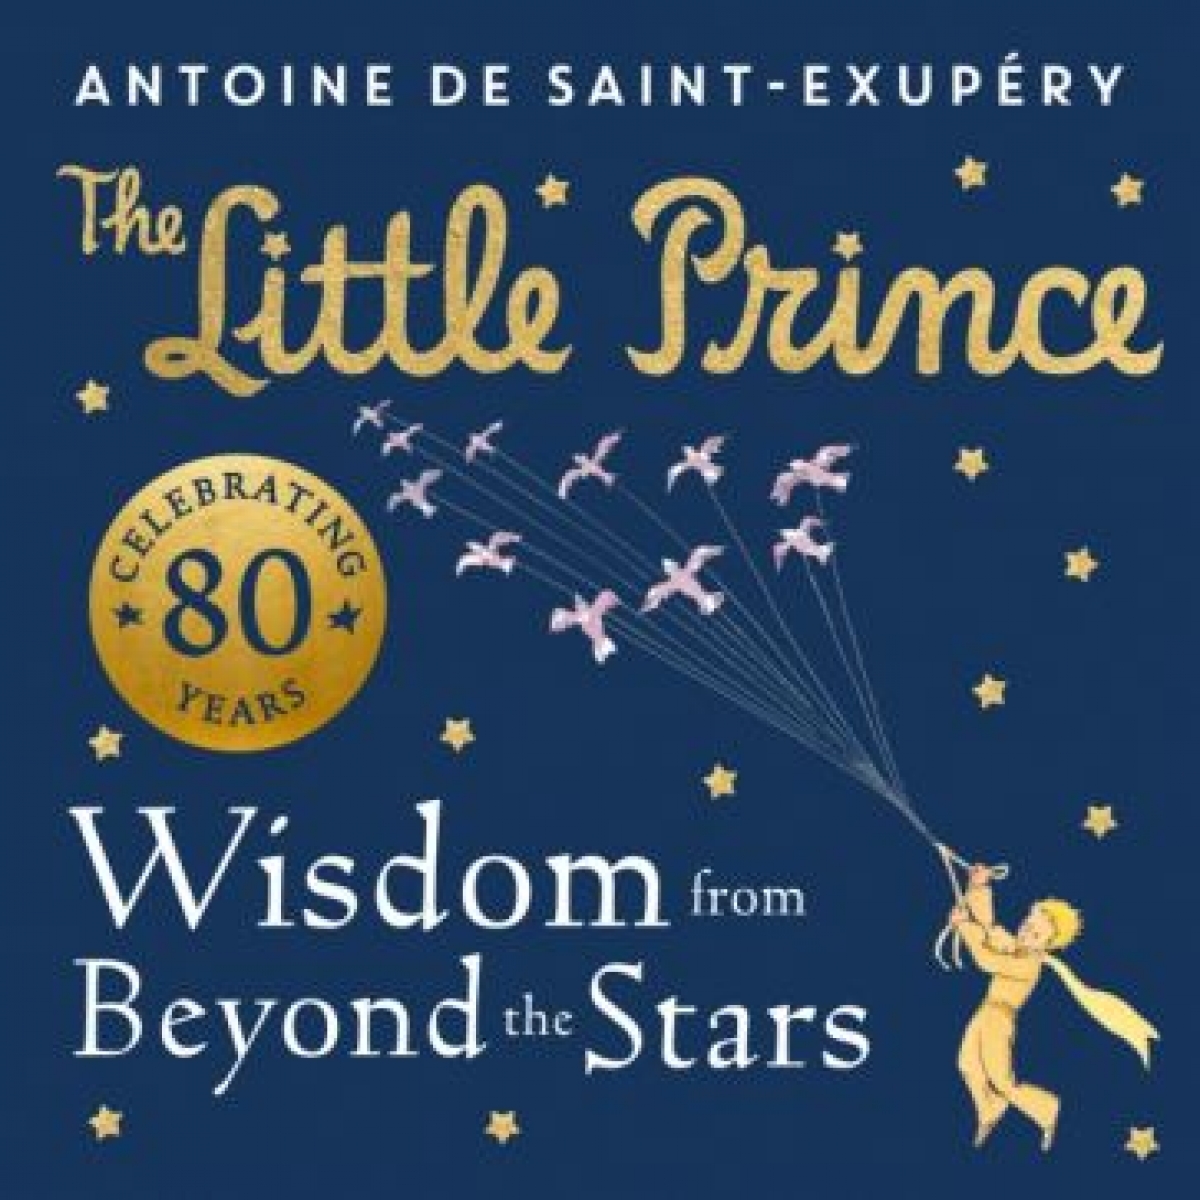 Saint-Exupery Antoine de The Little Prince. Wisdom from Beyond the Stars 